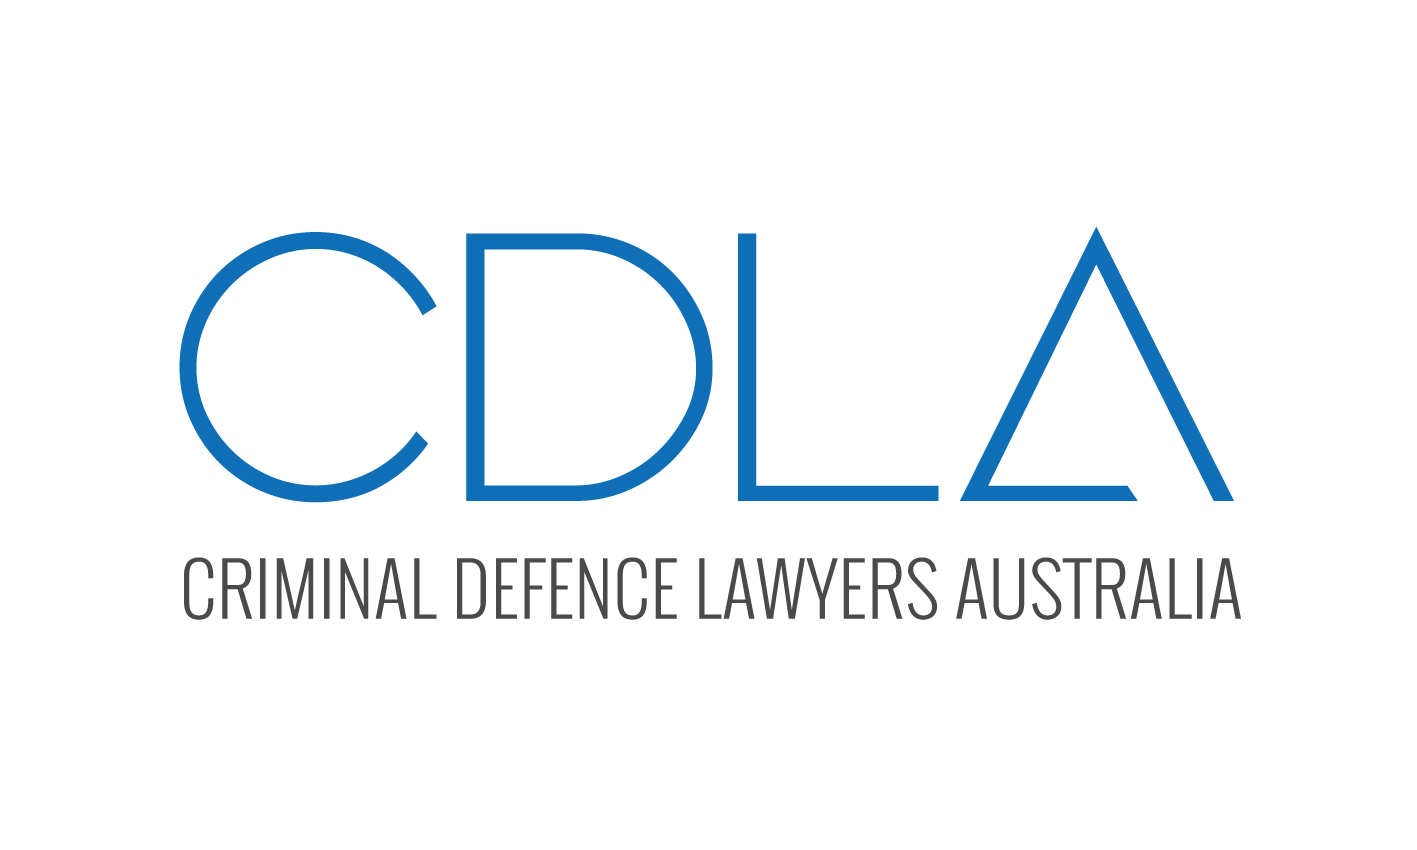 Sample Character Reference Letter To Judge For Dui from www.criminaldefencelawyers.com.au